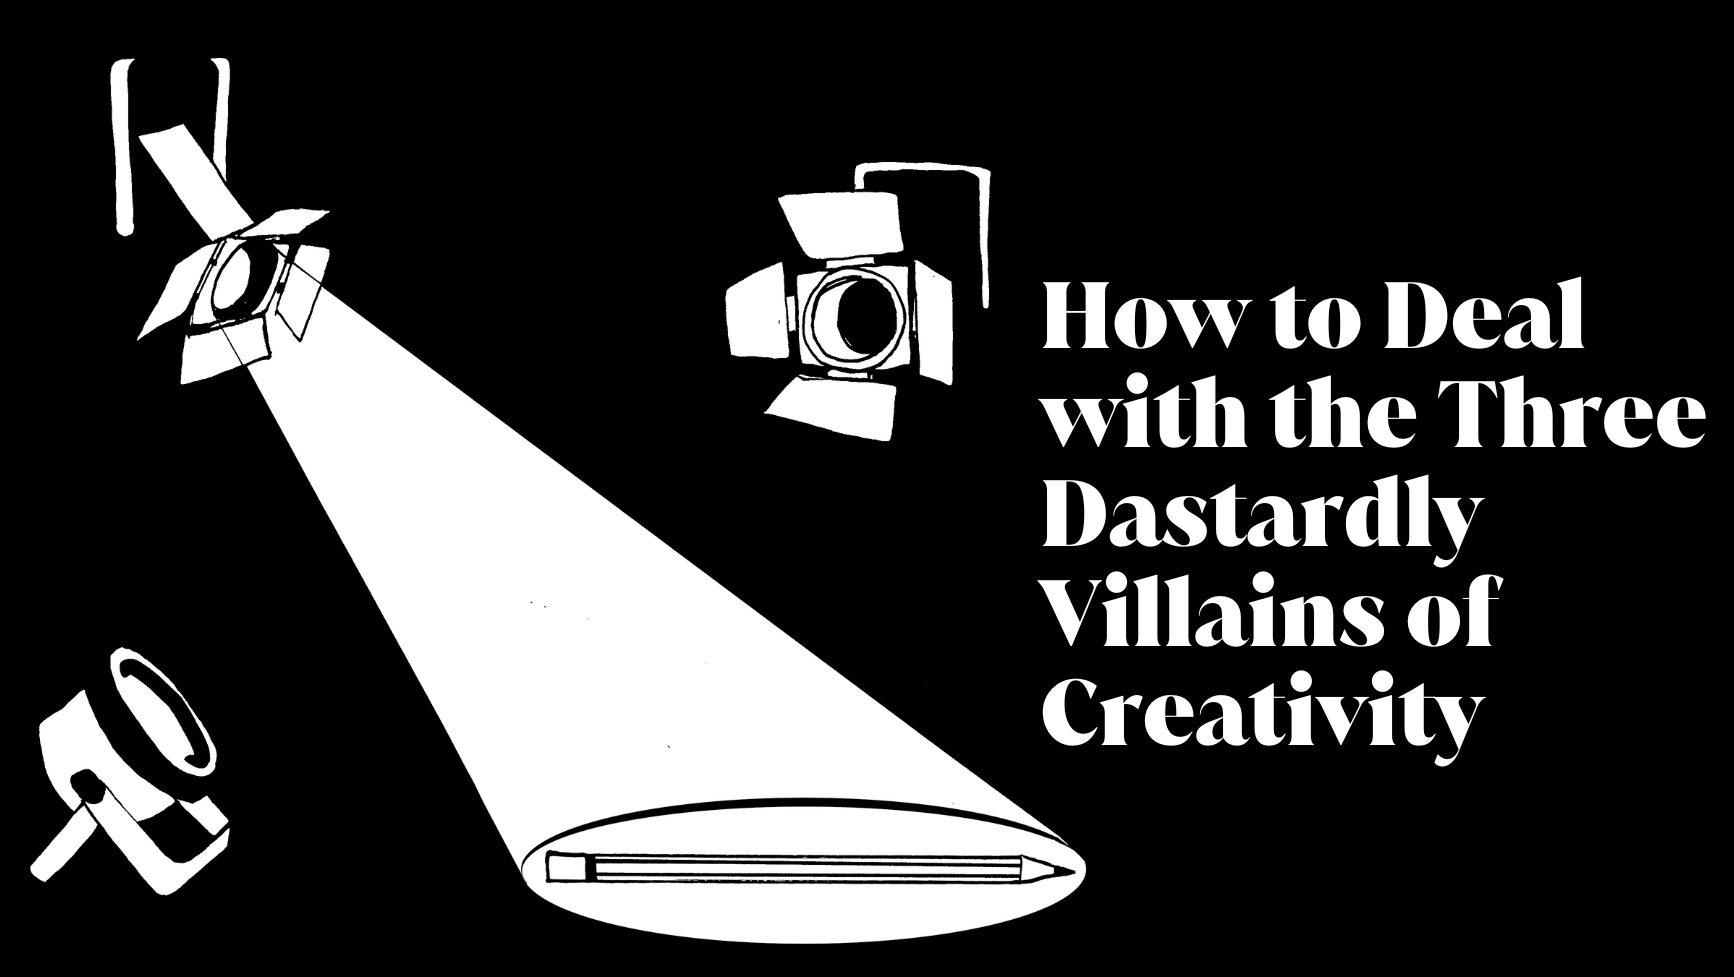 How to Deal with the Three Dastardly Villains of Creativity